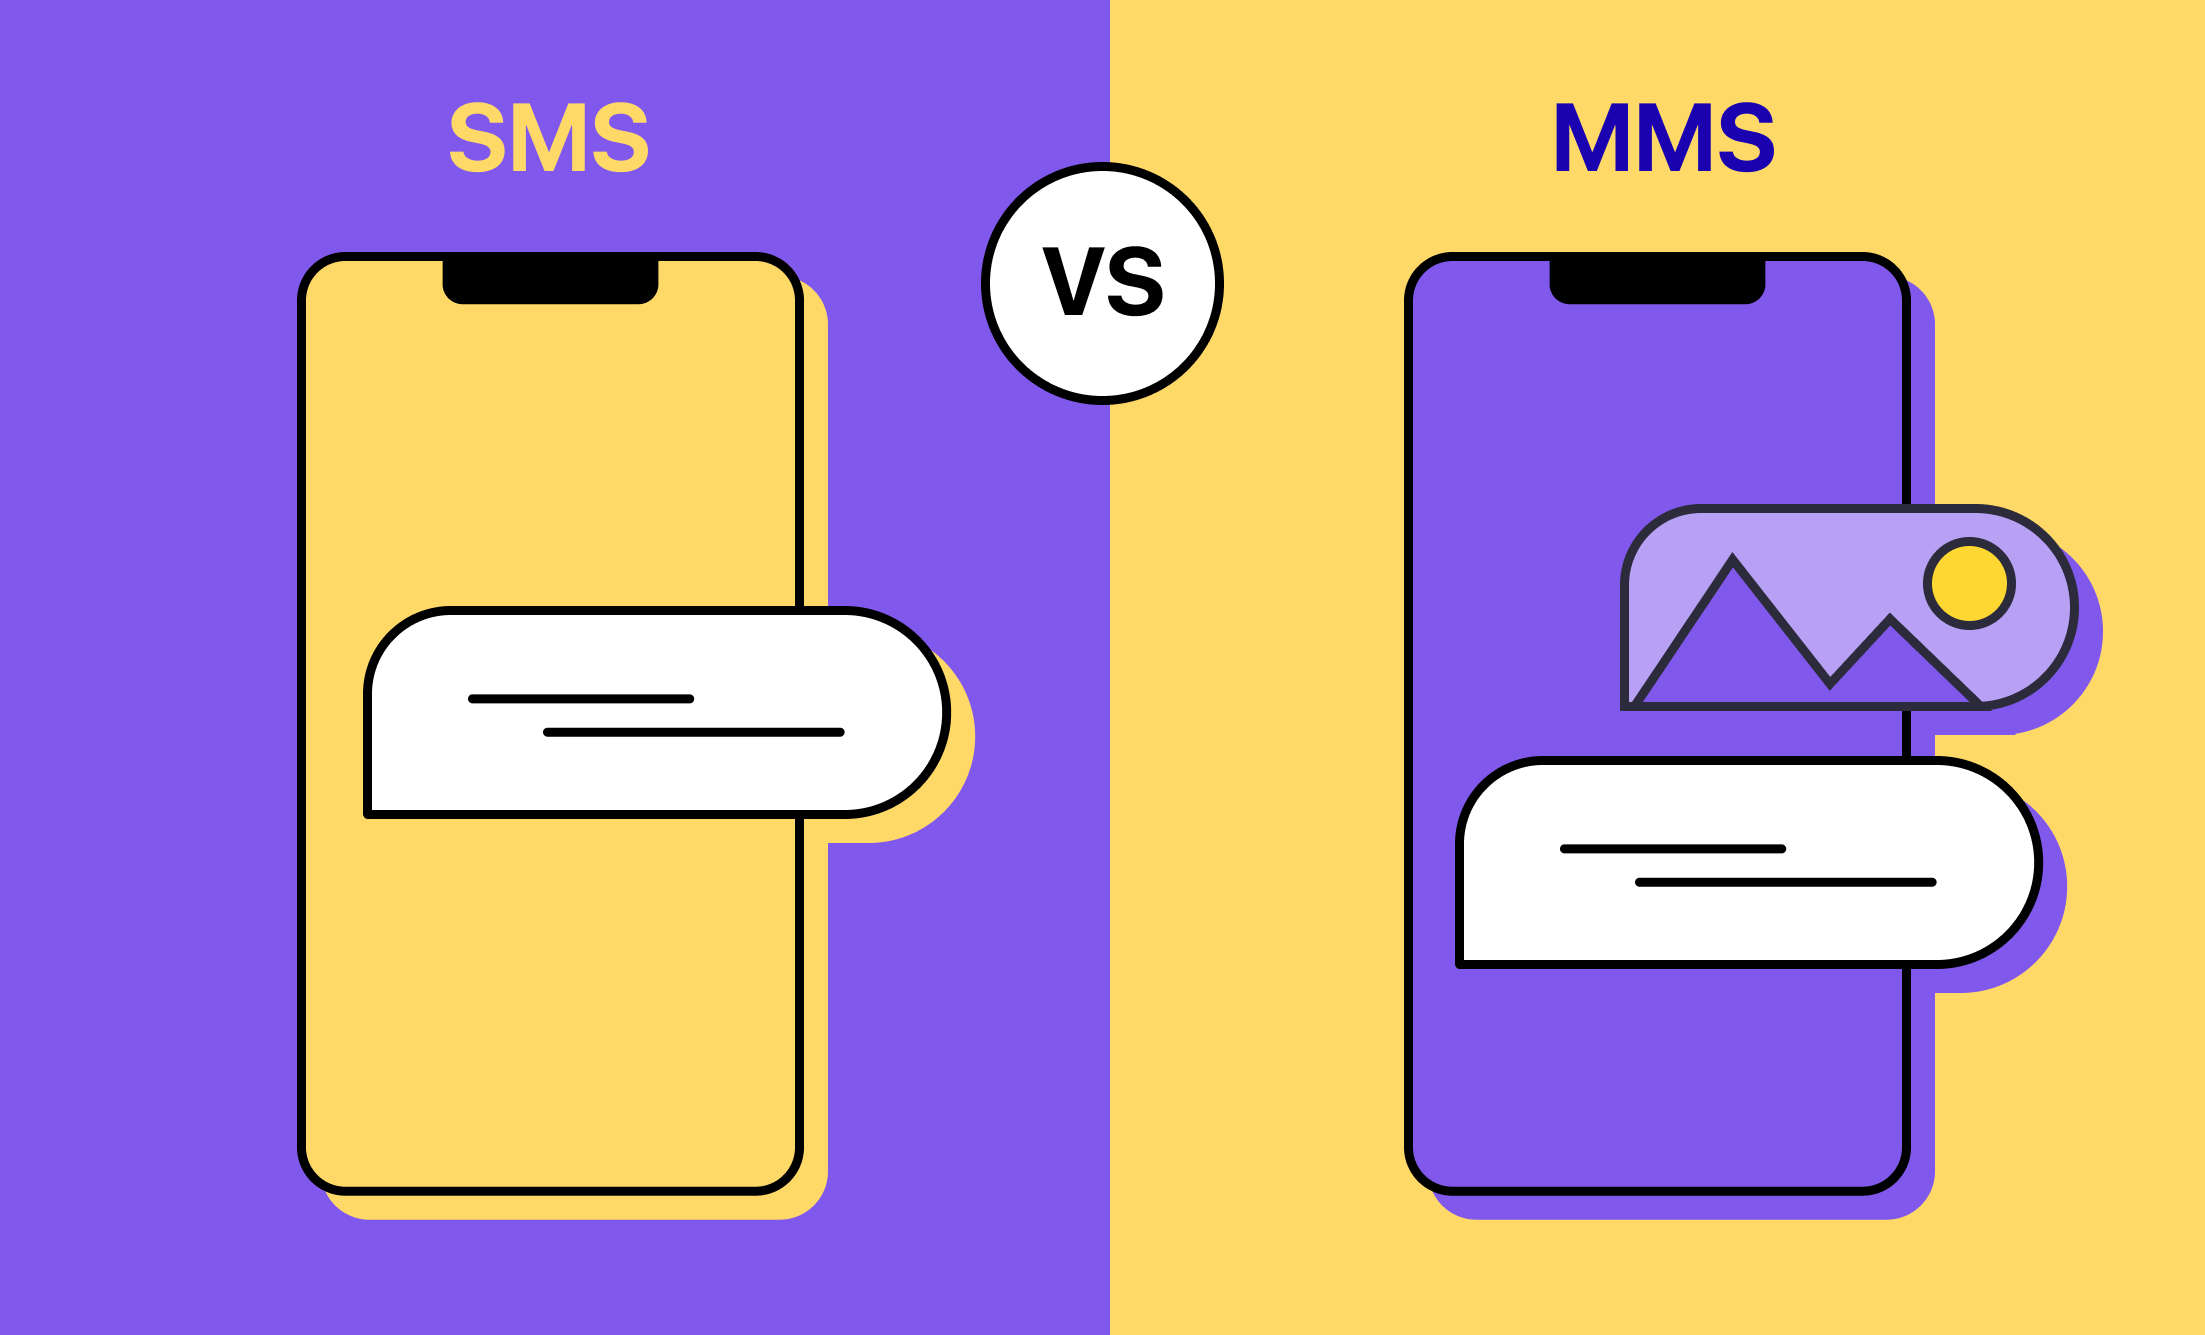 Illustration showing the difference between SMS and MMS.